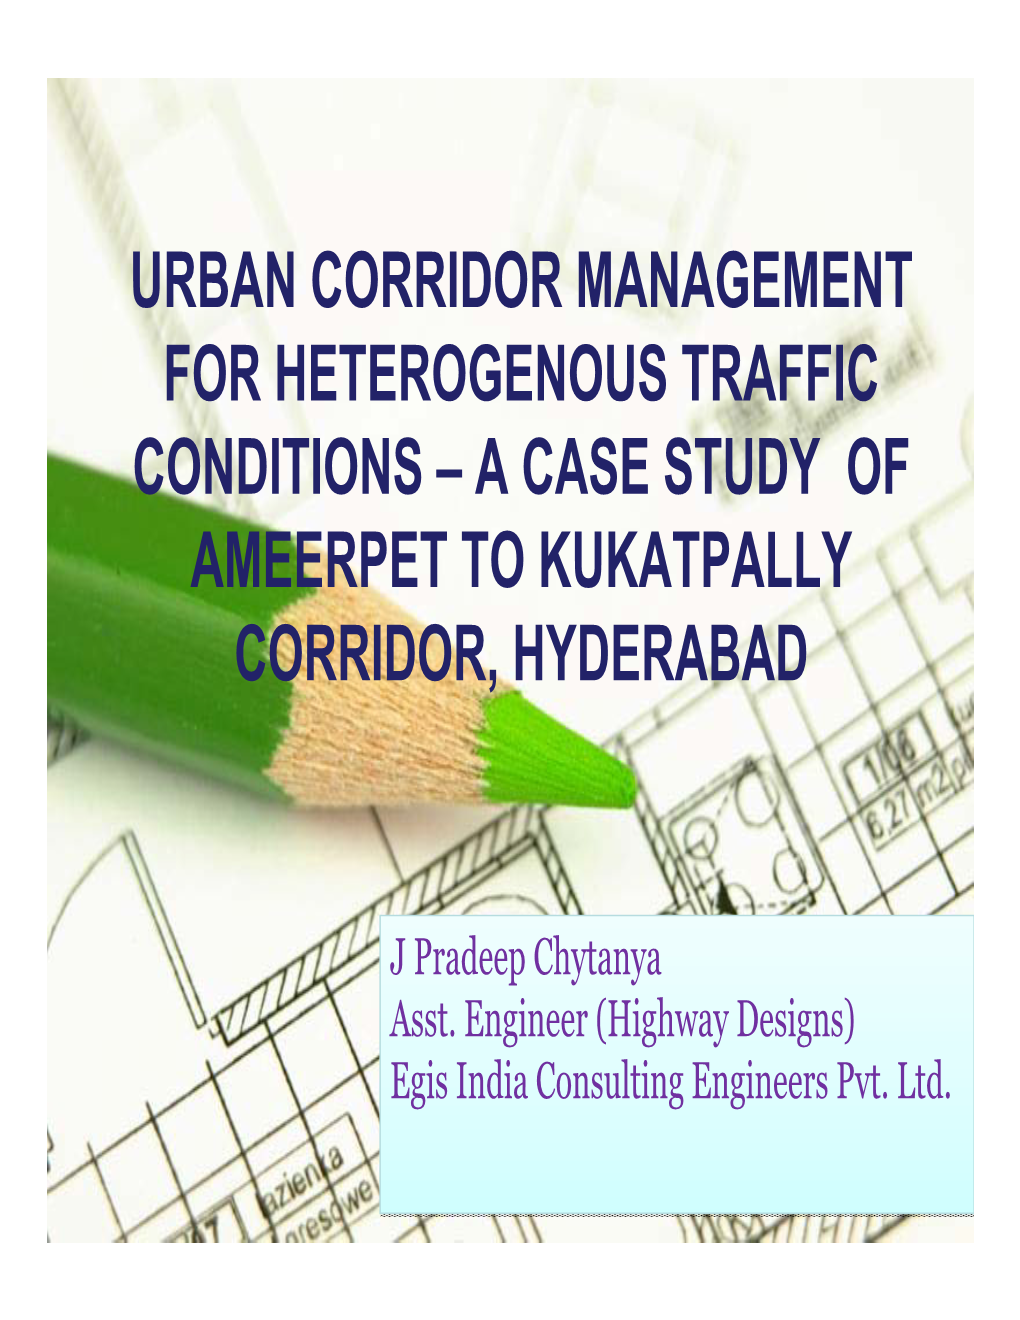 A Case Study of Ameerpet to Kukatpally Corridor, Hyderabad